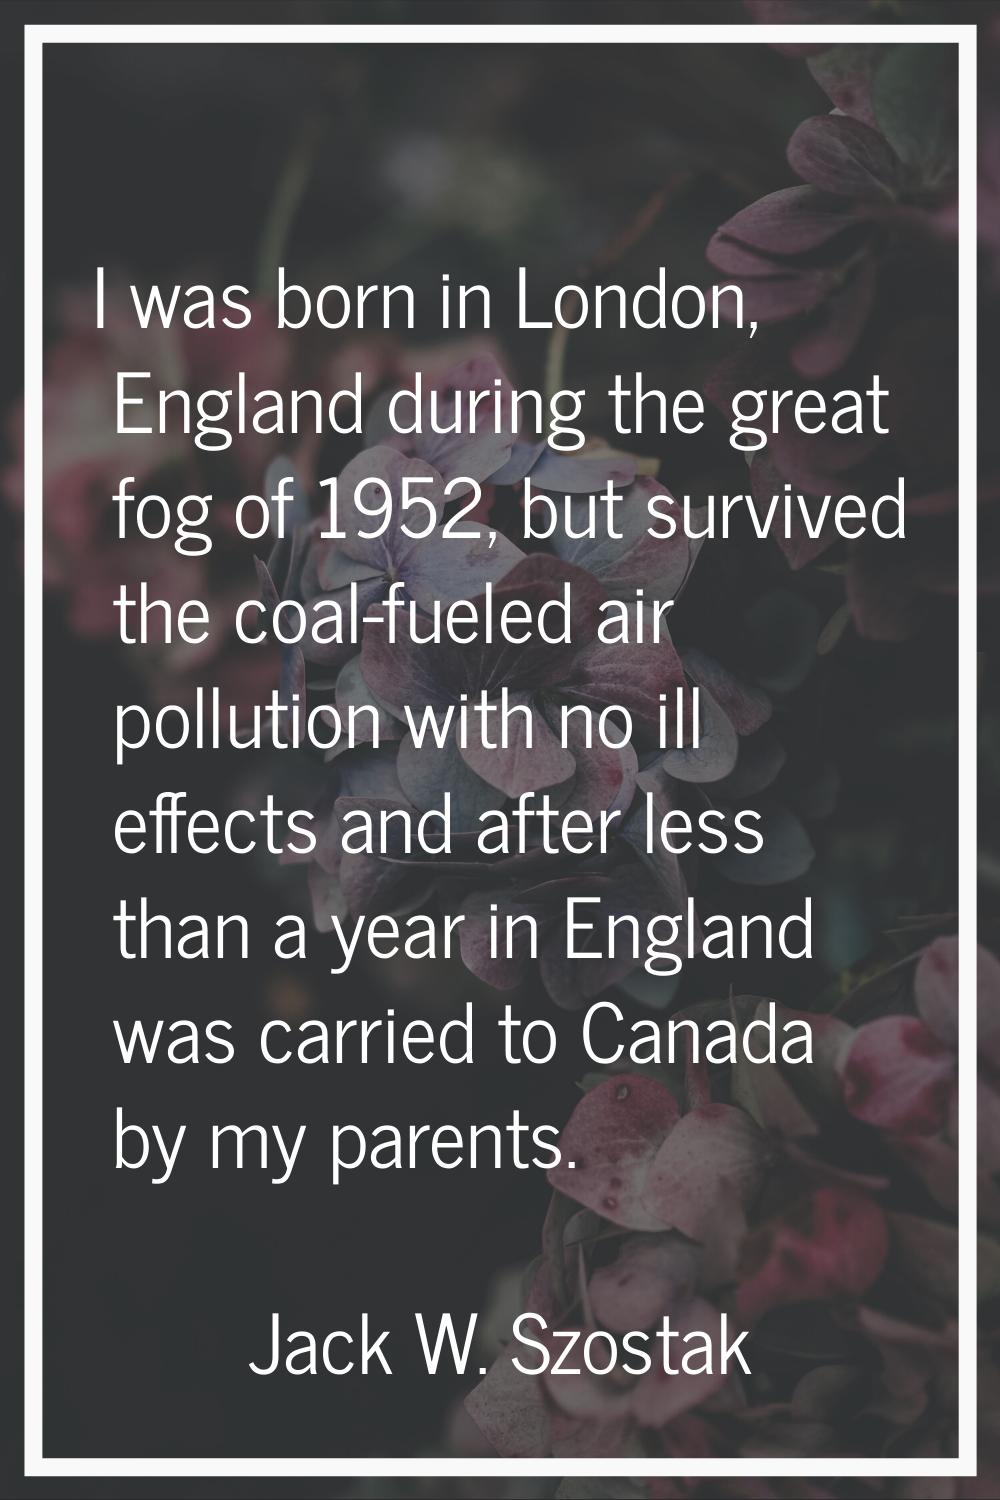 I was born in London, England during the great fog of 1952, but survived the coal-fueled air pollut